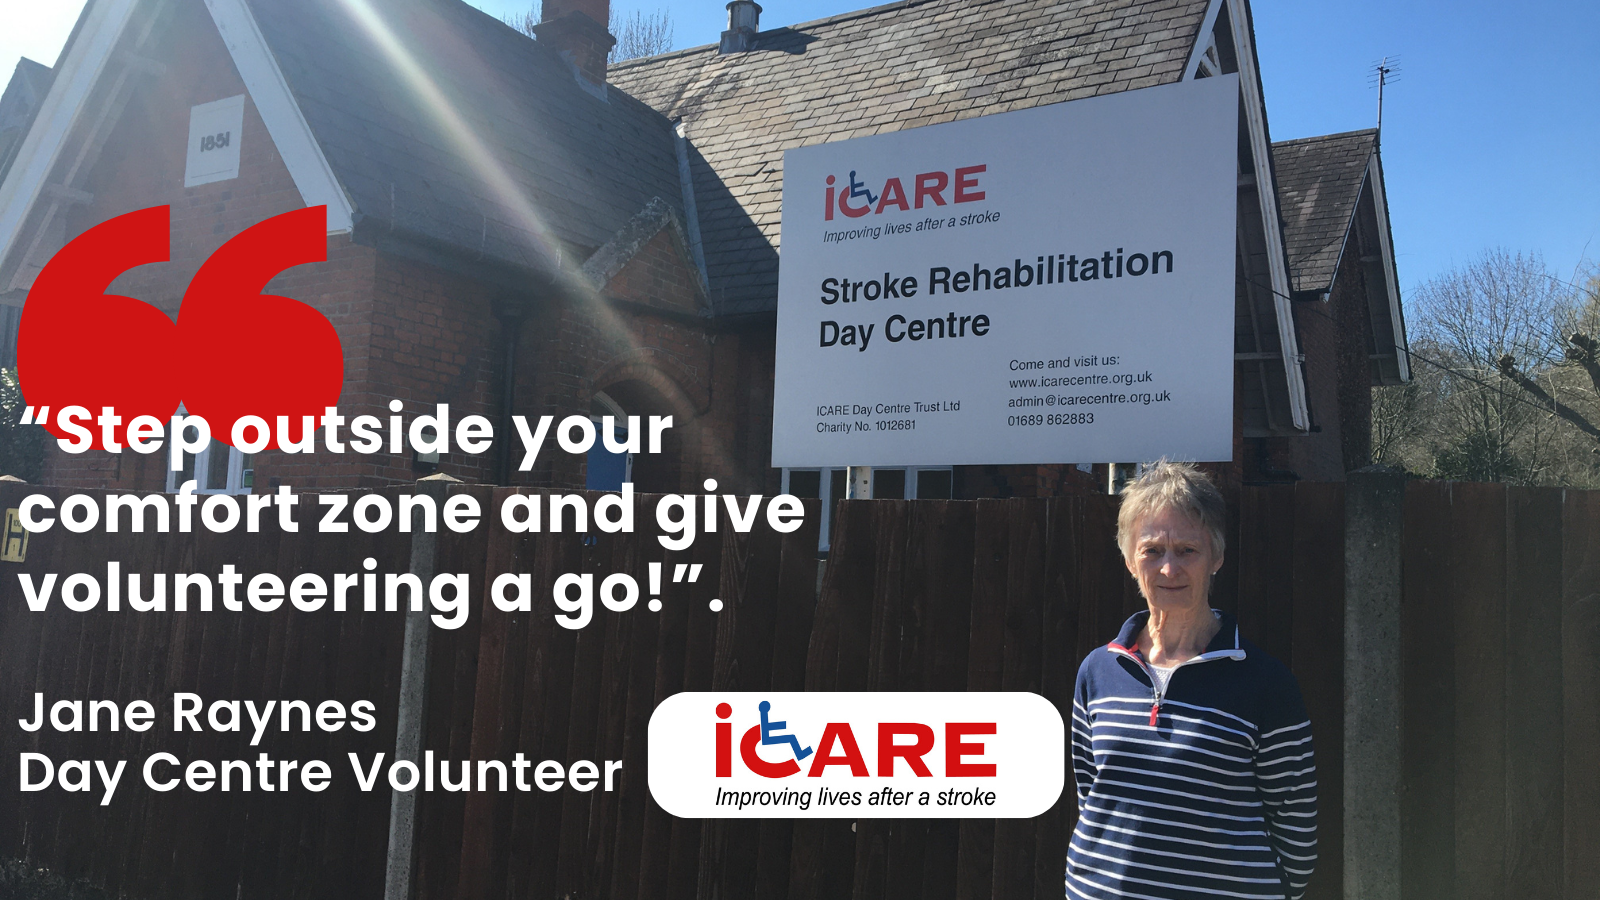 Image of iCARE Day Centre volunteer, Jane Raynes, in front of iCARE day centre building. Quote on image, with words "Step outside your comfort zone and give volunteering a go!"